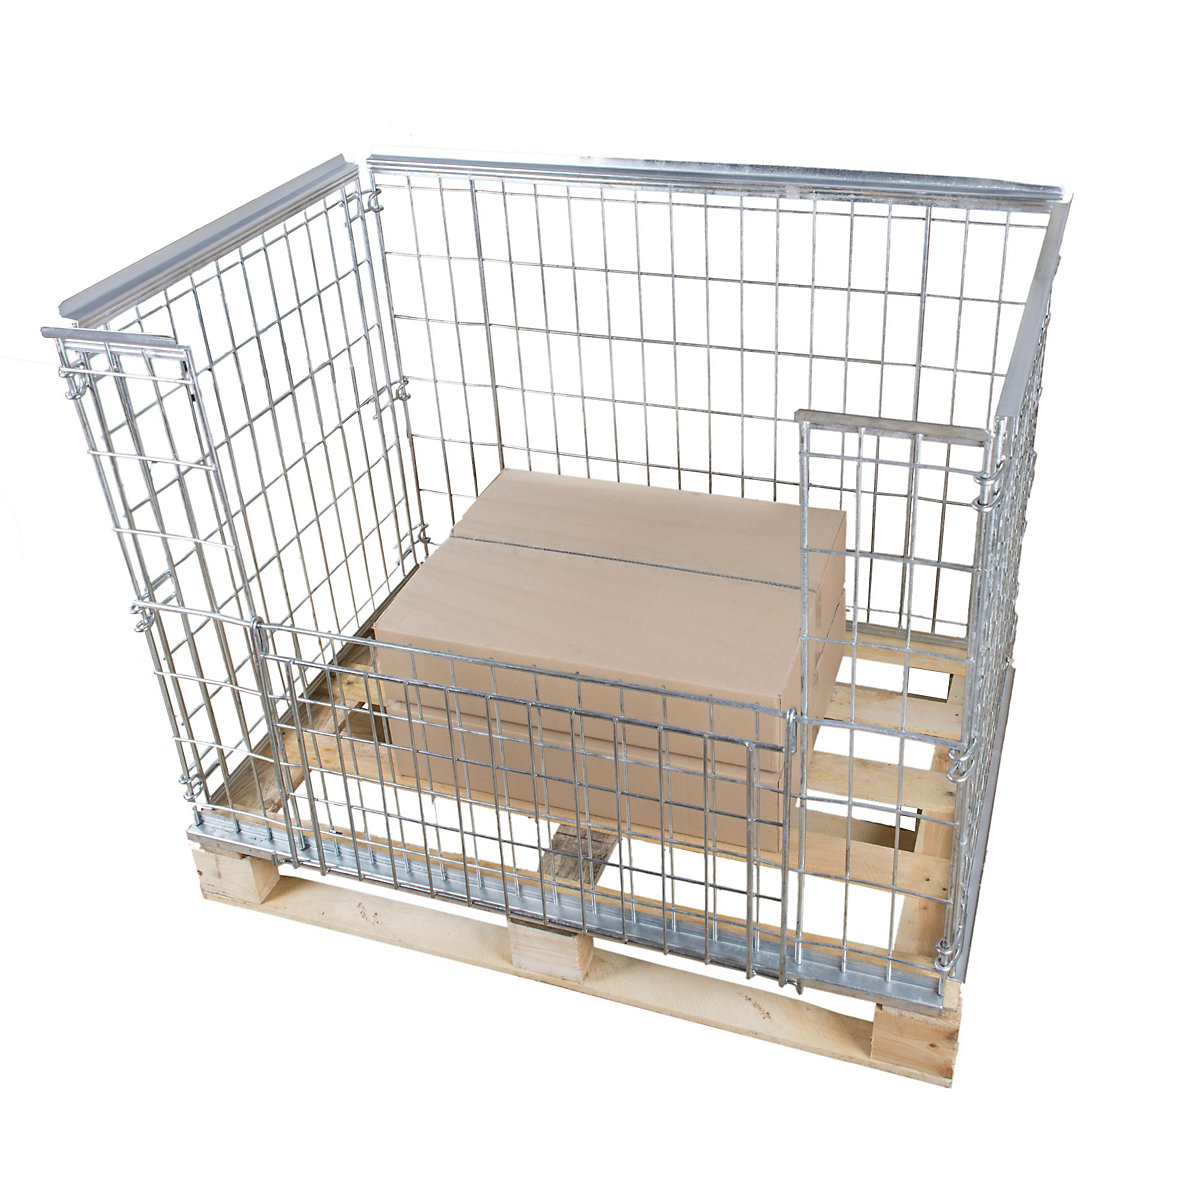 Mesh stacking frame for EURO pallet, with drop gate on 1 long side, effective height 1160 mm-5